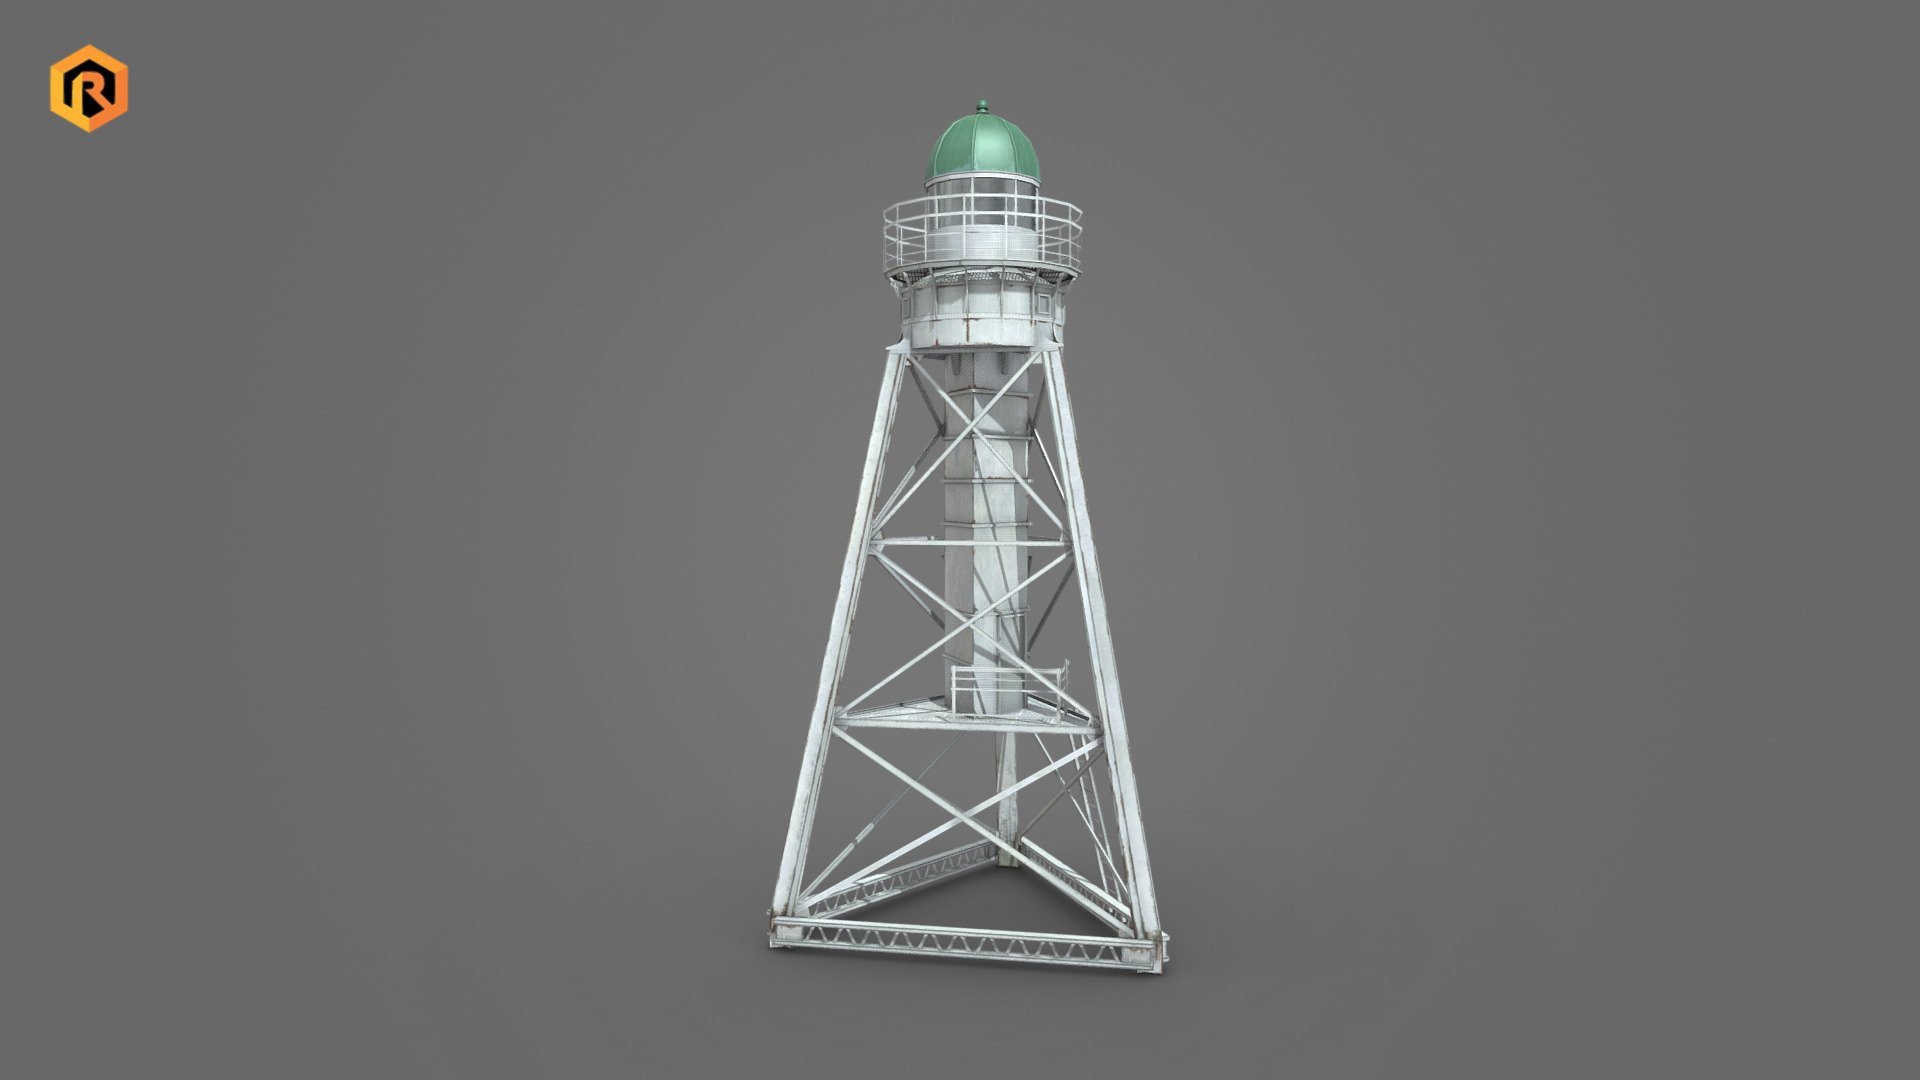 Low-poly 3D model of White Metal Lighthouse.
It is best for use in games and other VR / AR, real-time applications such as Unity or Unreal Engine. 
It can also be rendered in Blender (ex Cycles) or Vray as the model is equipped with detailed textures.

Technical details:




2048 x 2048 Diffuse and AO textures

4236 Triangles

3444 Vertices

Model is one mesh.

Solid and glass material are correctly assigned under different IDs

Lot of additional file formats included (Blender, Unity, Maya etc.) 

More file formats are available in additional zip file on product page.

Please feel free to contact me if you have any questions or need any support for this asset.

Support e-mail: support@rescue3d.com - Metal Lighthouse - Buy Royalty Free 3D model by Rescue3D Assets (@rescue3d) 3d model